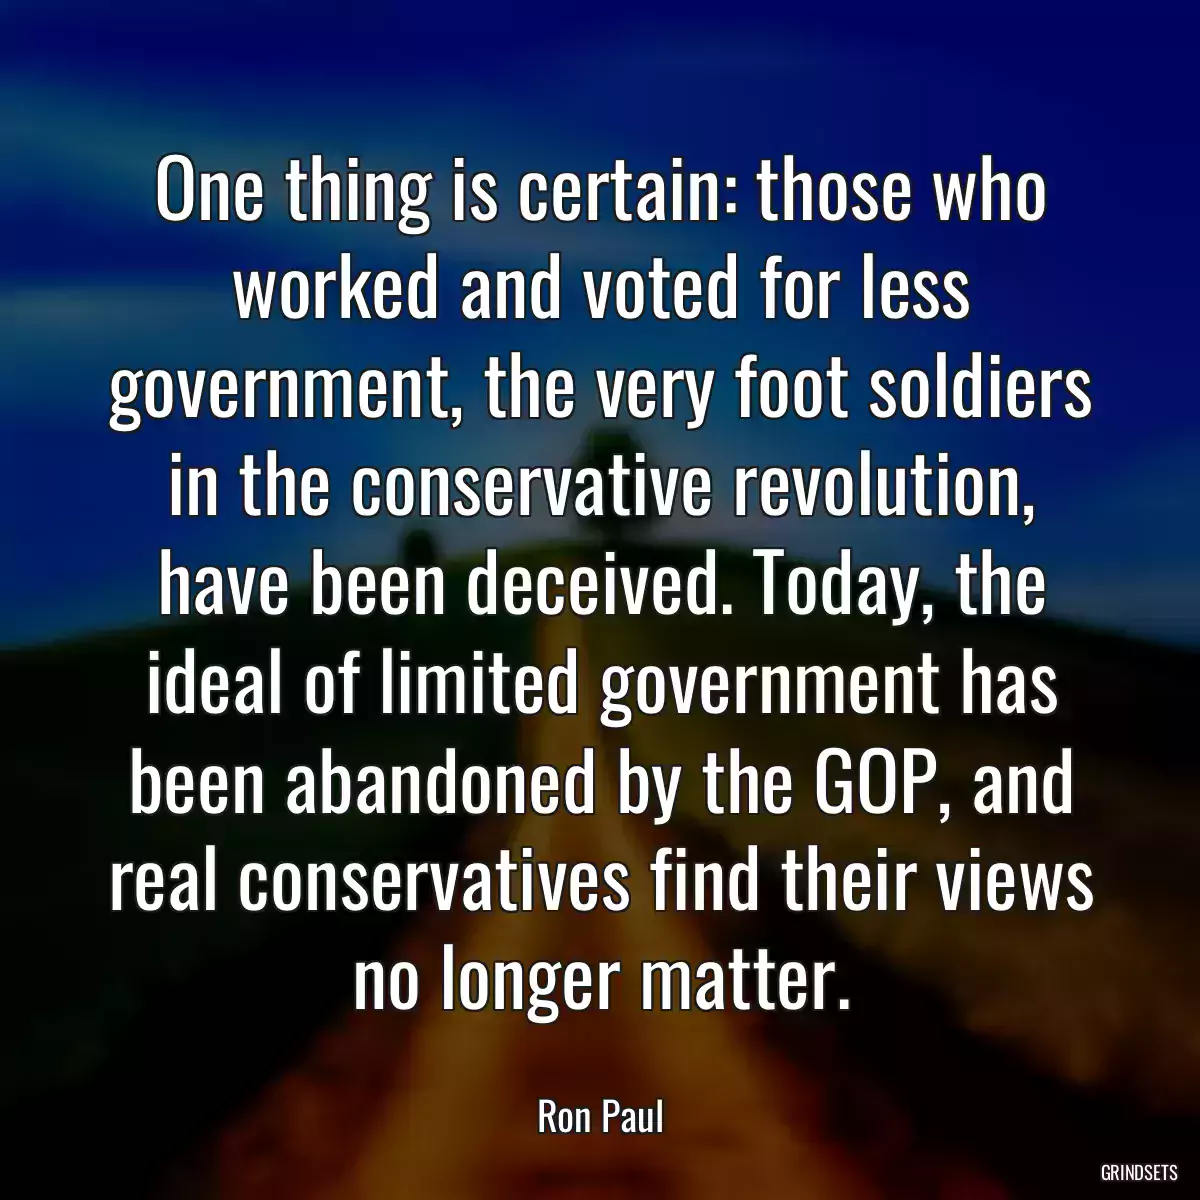 One thing is certain: those who worked and voted for less government, the very foot soldiers in the conservative revolution, have been deceived. Today, the ideal of limited government has been abandoned by the GOP, and real conservatives find their views no longer matter.